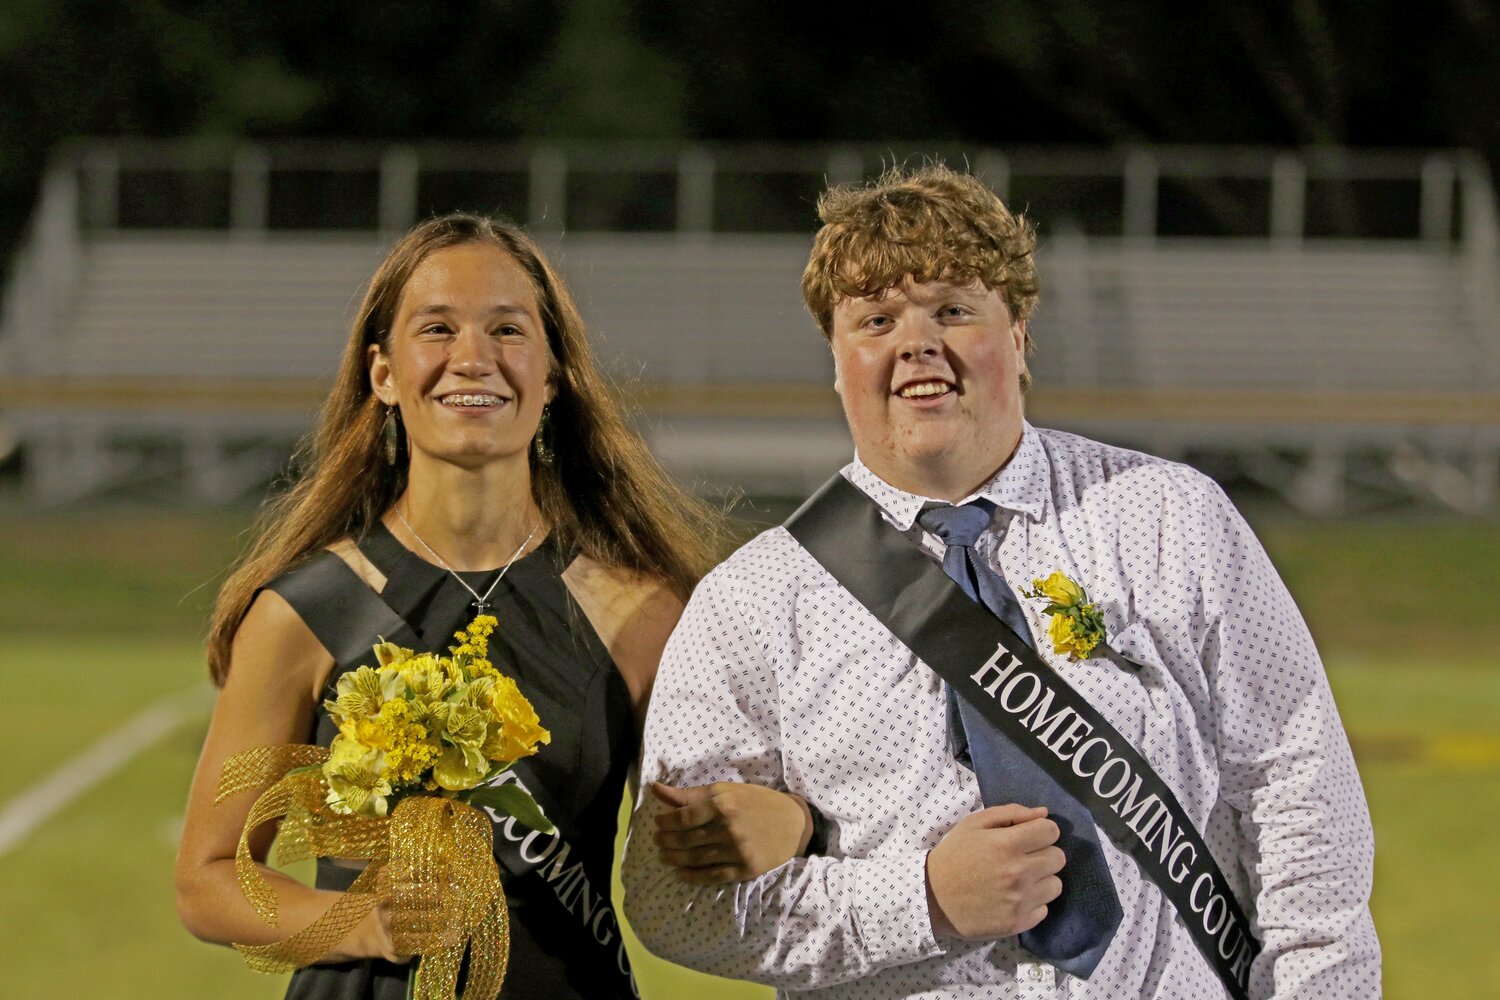 Homecoming court nominees Kali Miller and Carson Pence.